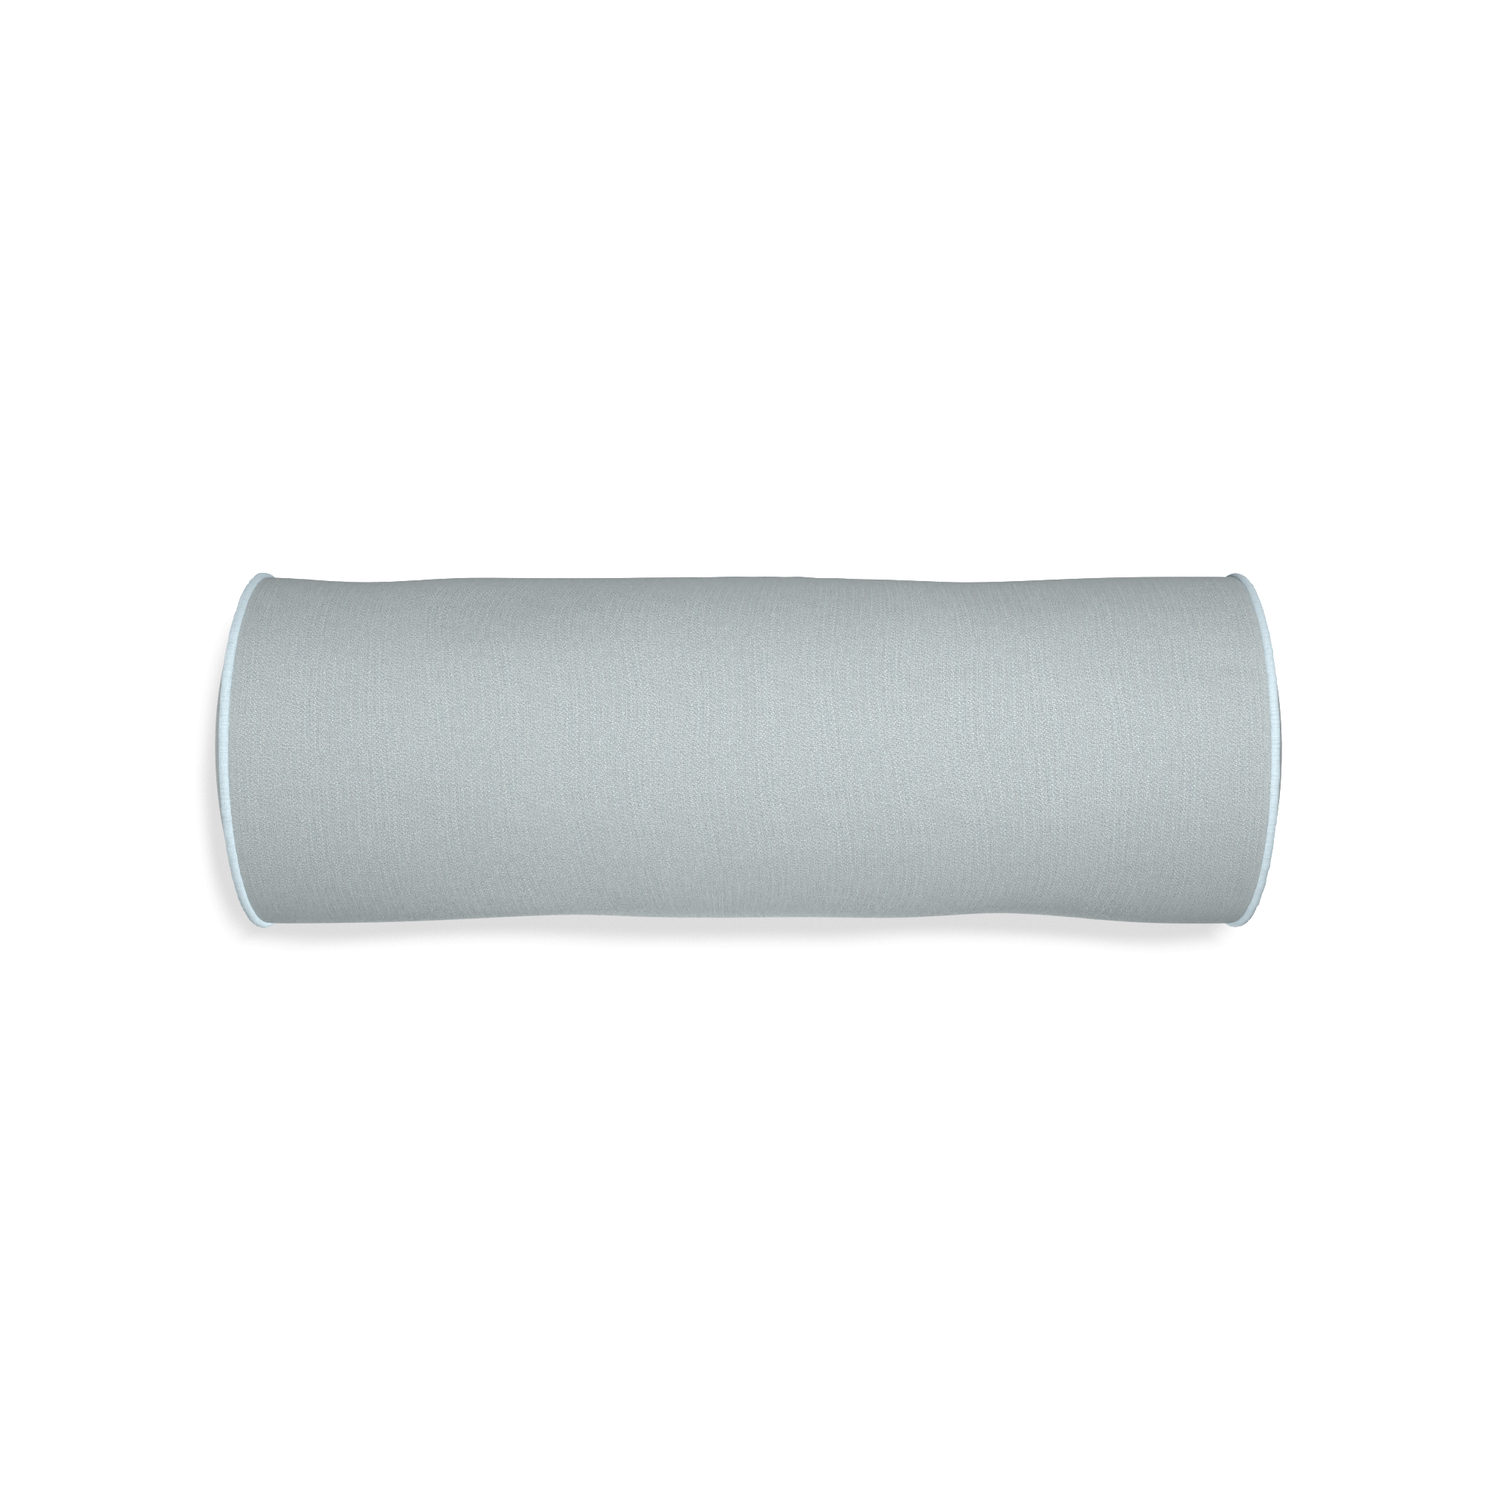 Bolster sea custom grey bluepillow with powder piping on white background